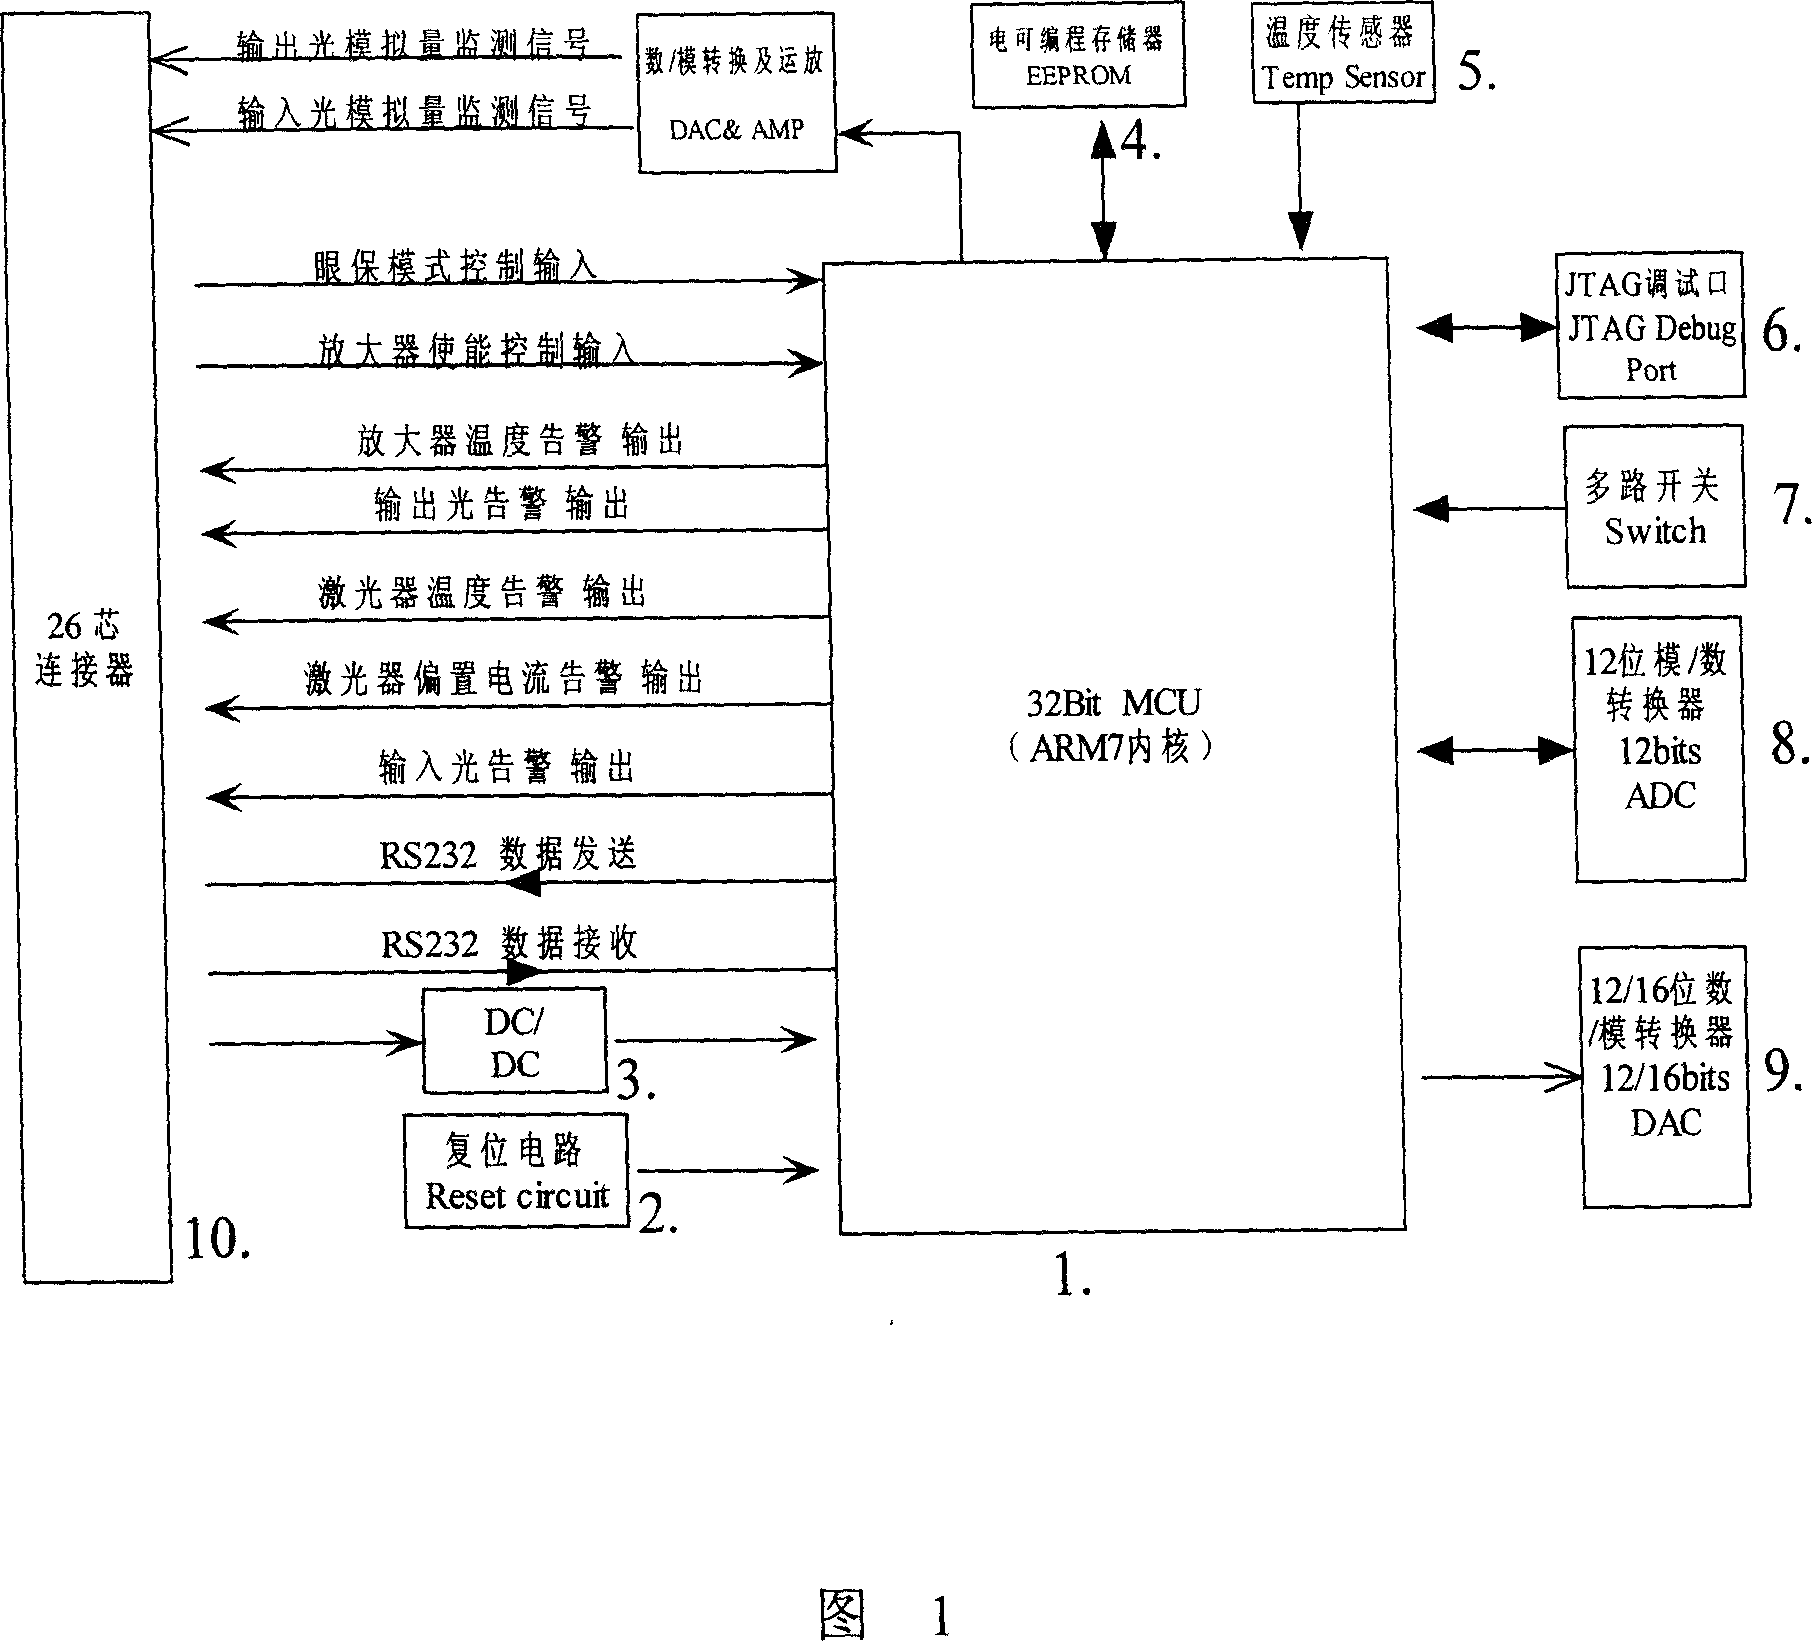 Control device for the optical amplifier